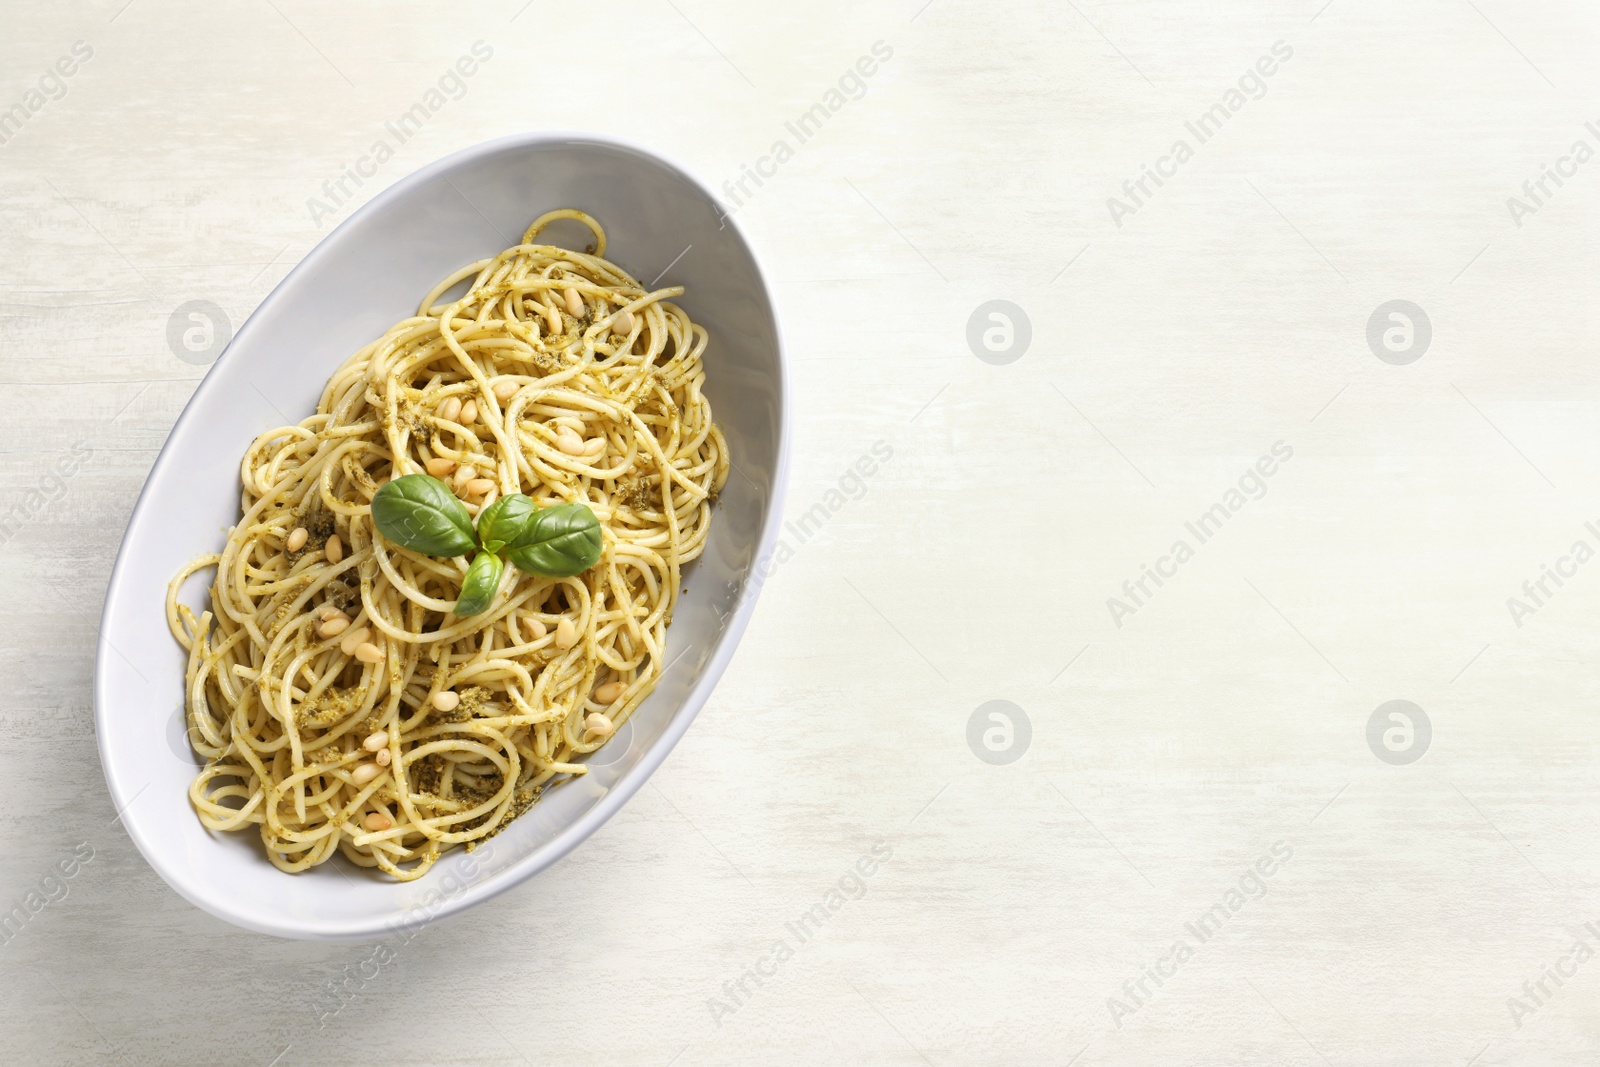 Photo of Plate of delicious basil pesto pasta on white background, top view with space for text